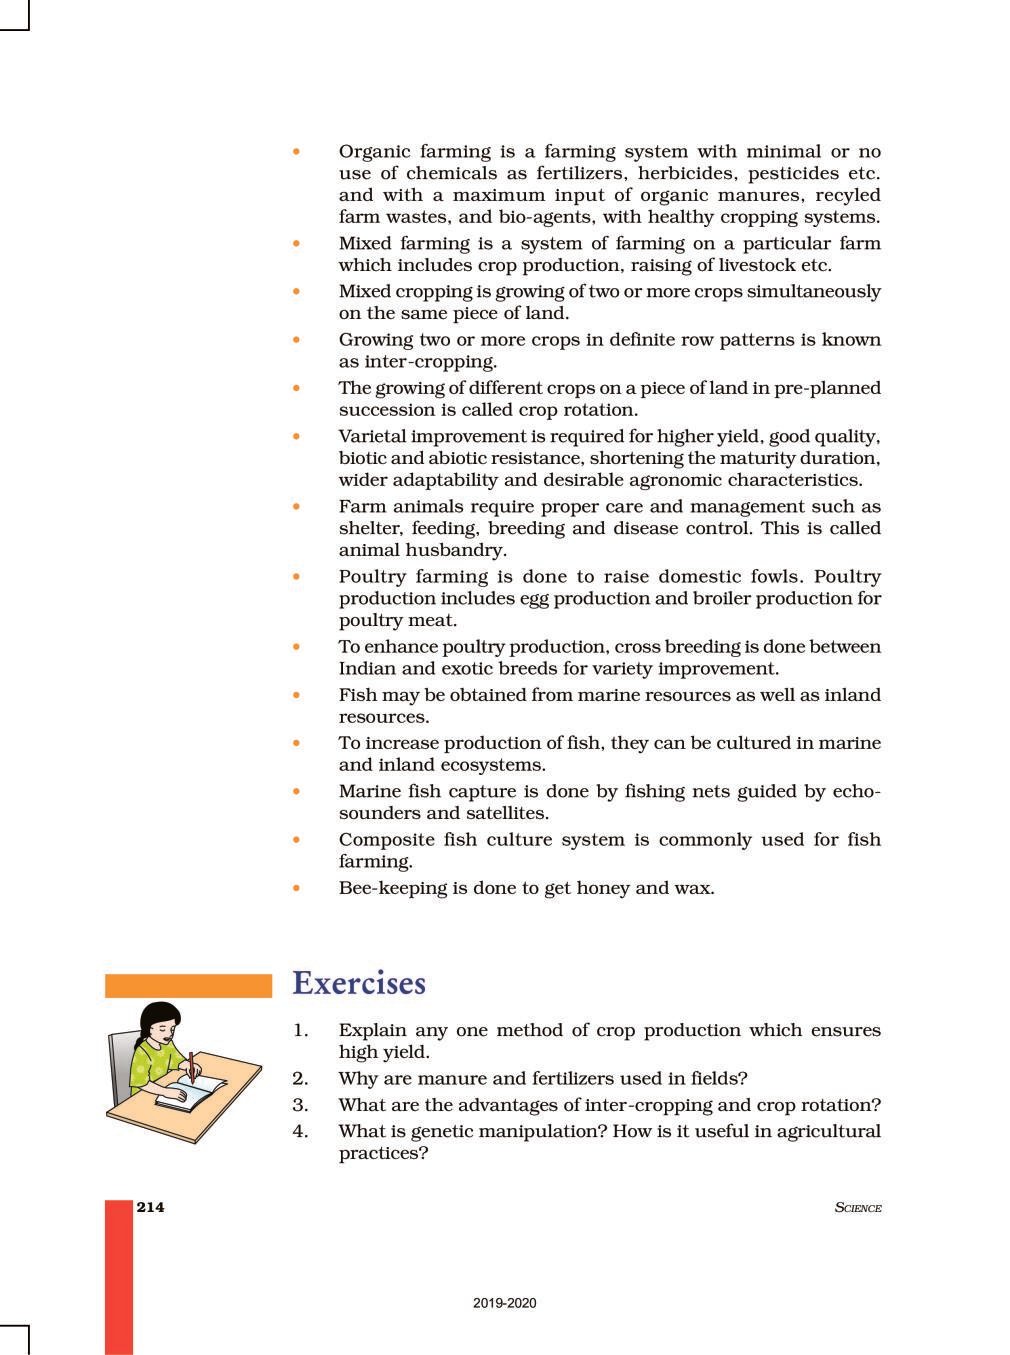 NCERT Book Class 9 Science Chapter 15 Improvement In Food Resources